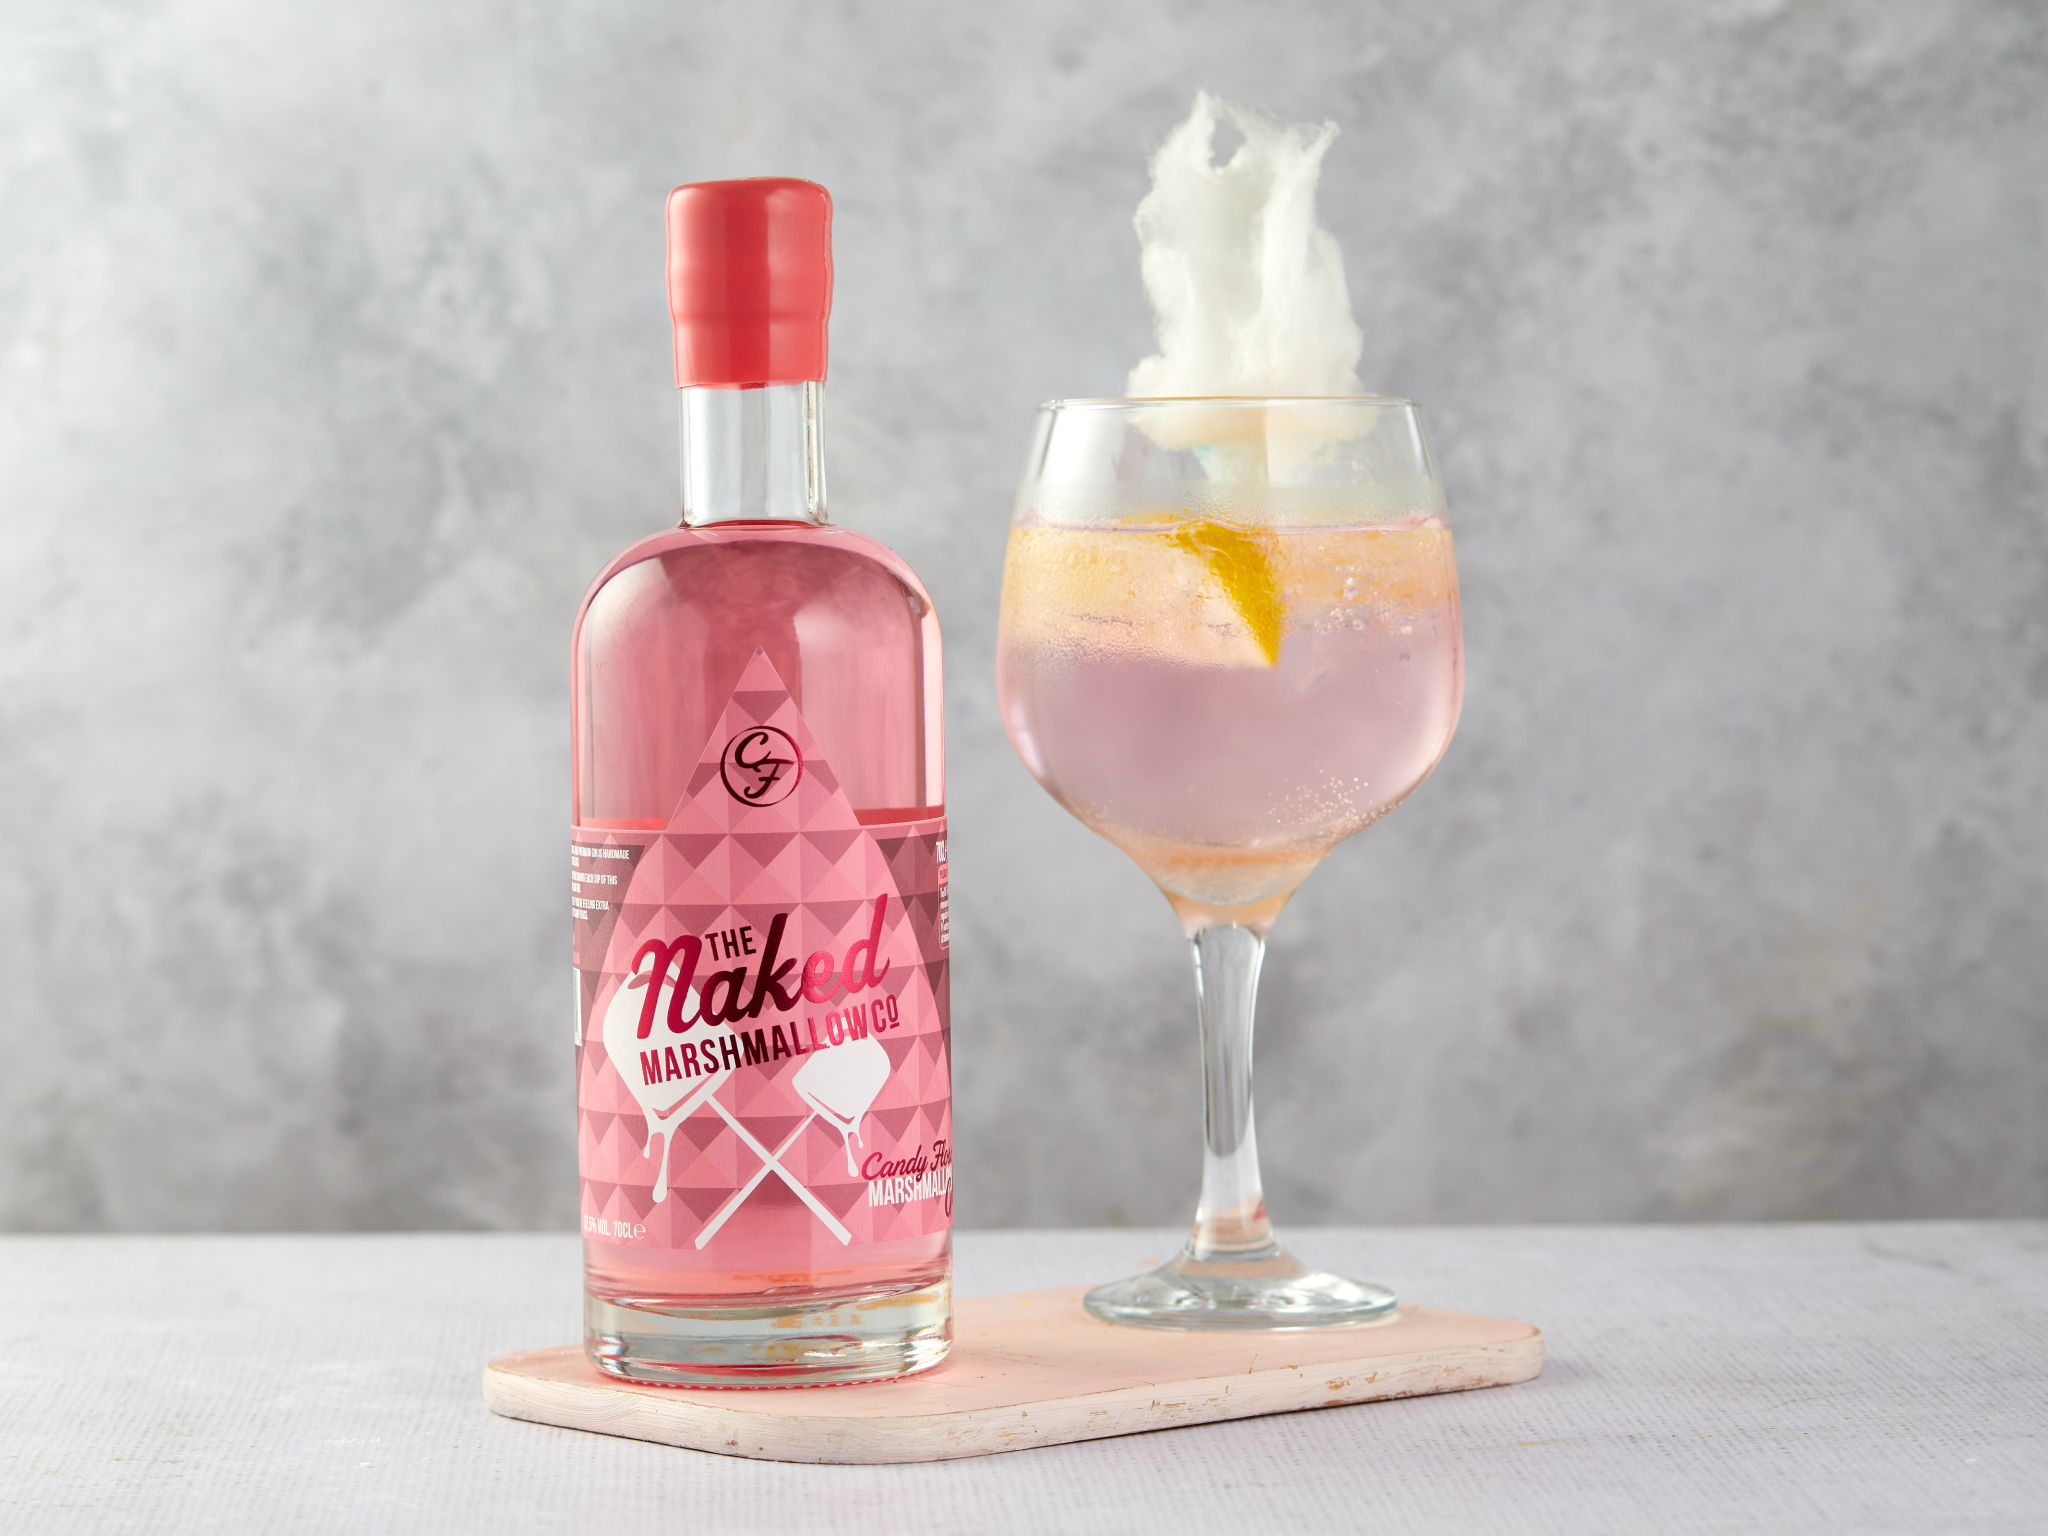 The-Naked-Marshmallow-Co-candy-floss-gourmet-marshmallow-gin-indybest